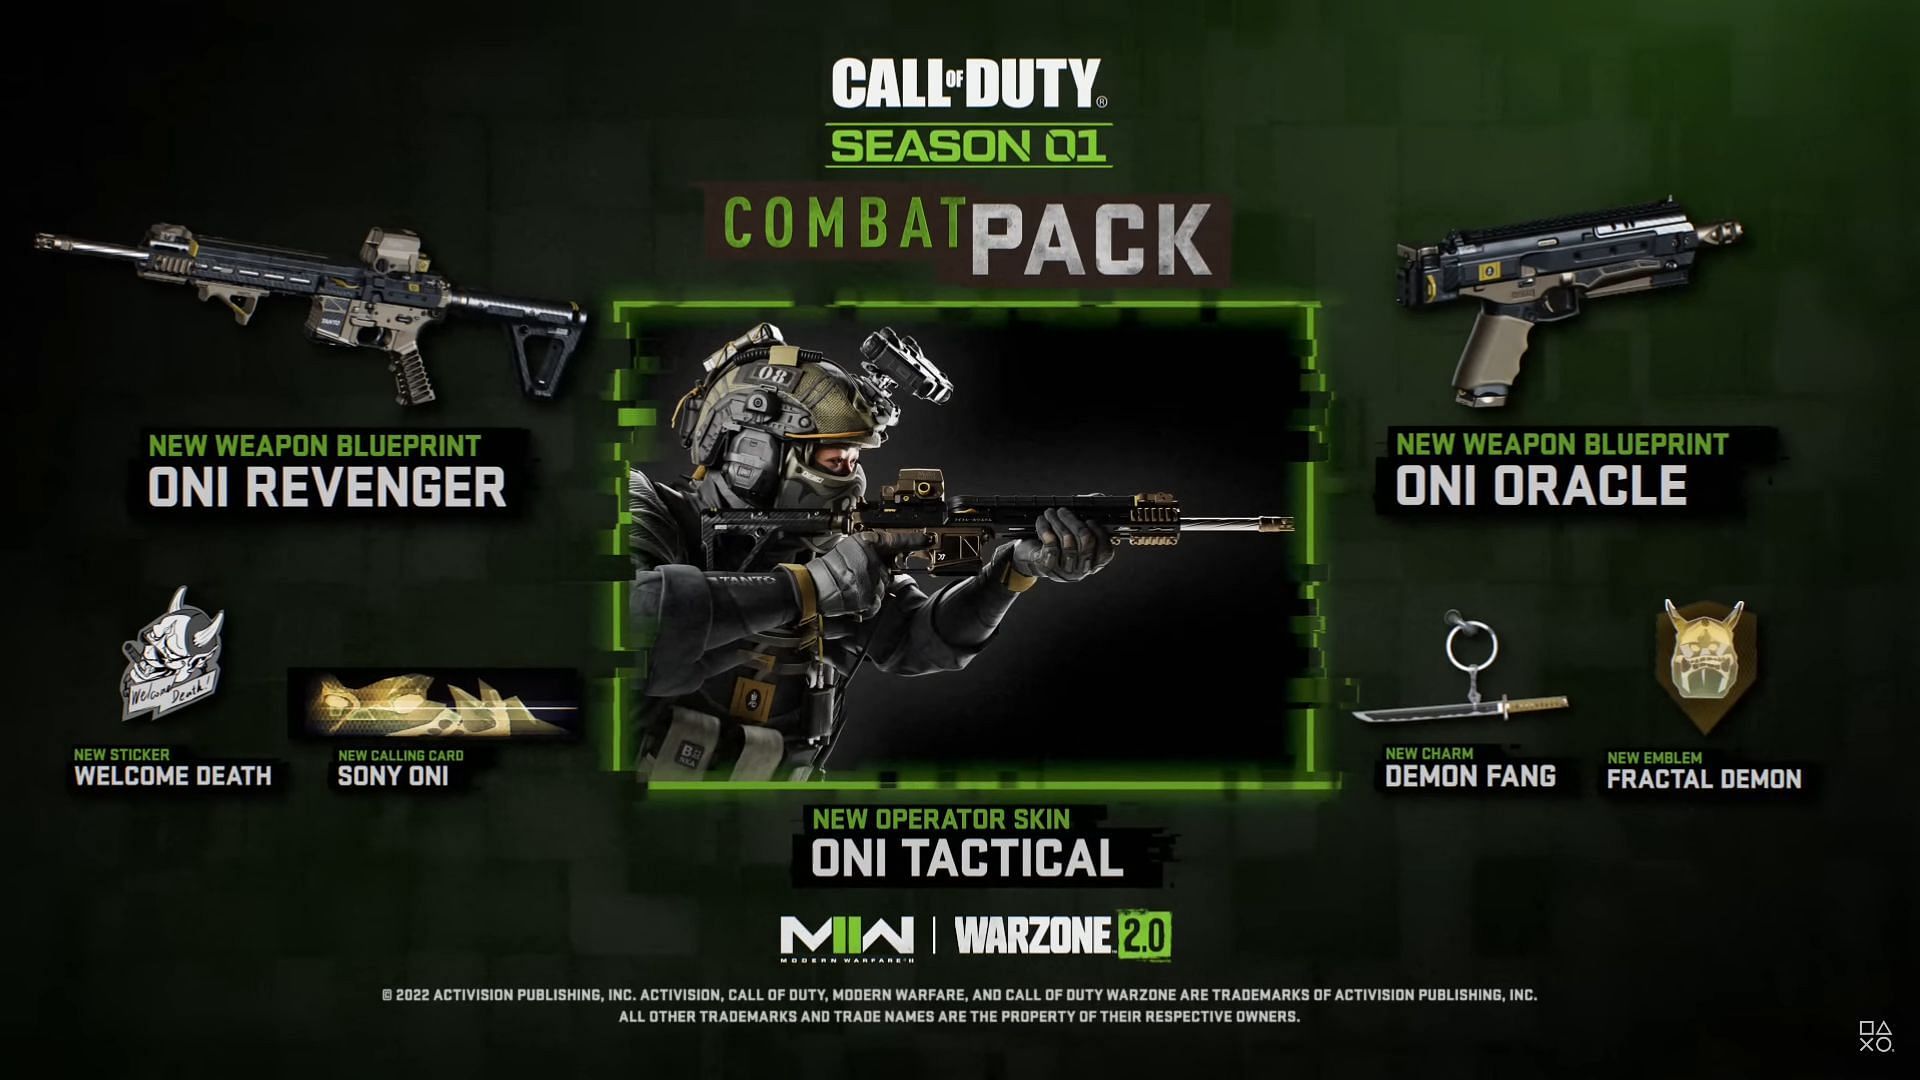 MW2 And Warzone 2 How To Get FREE Driver Pack Bundle on  PRIME G